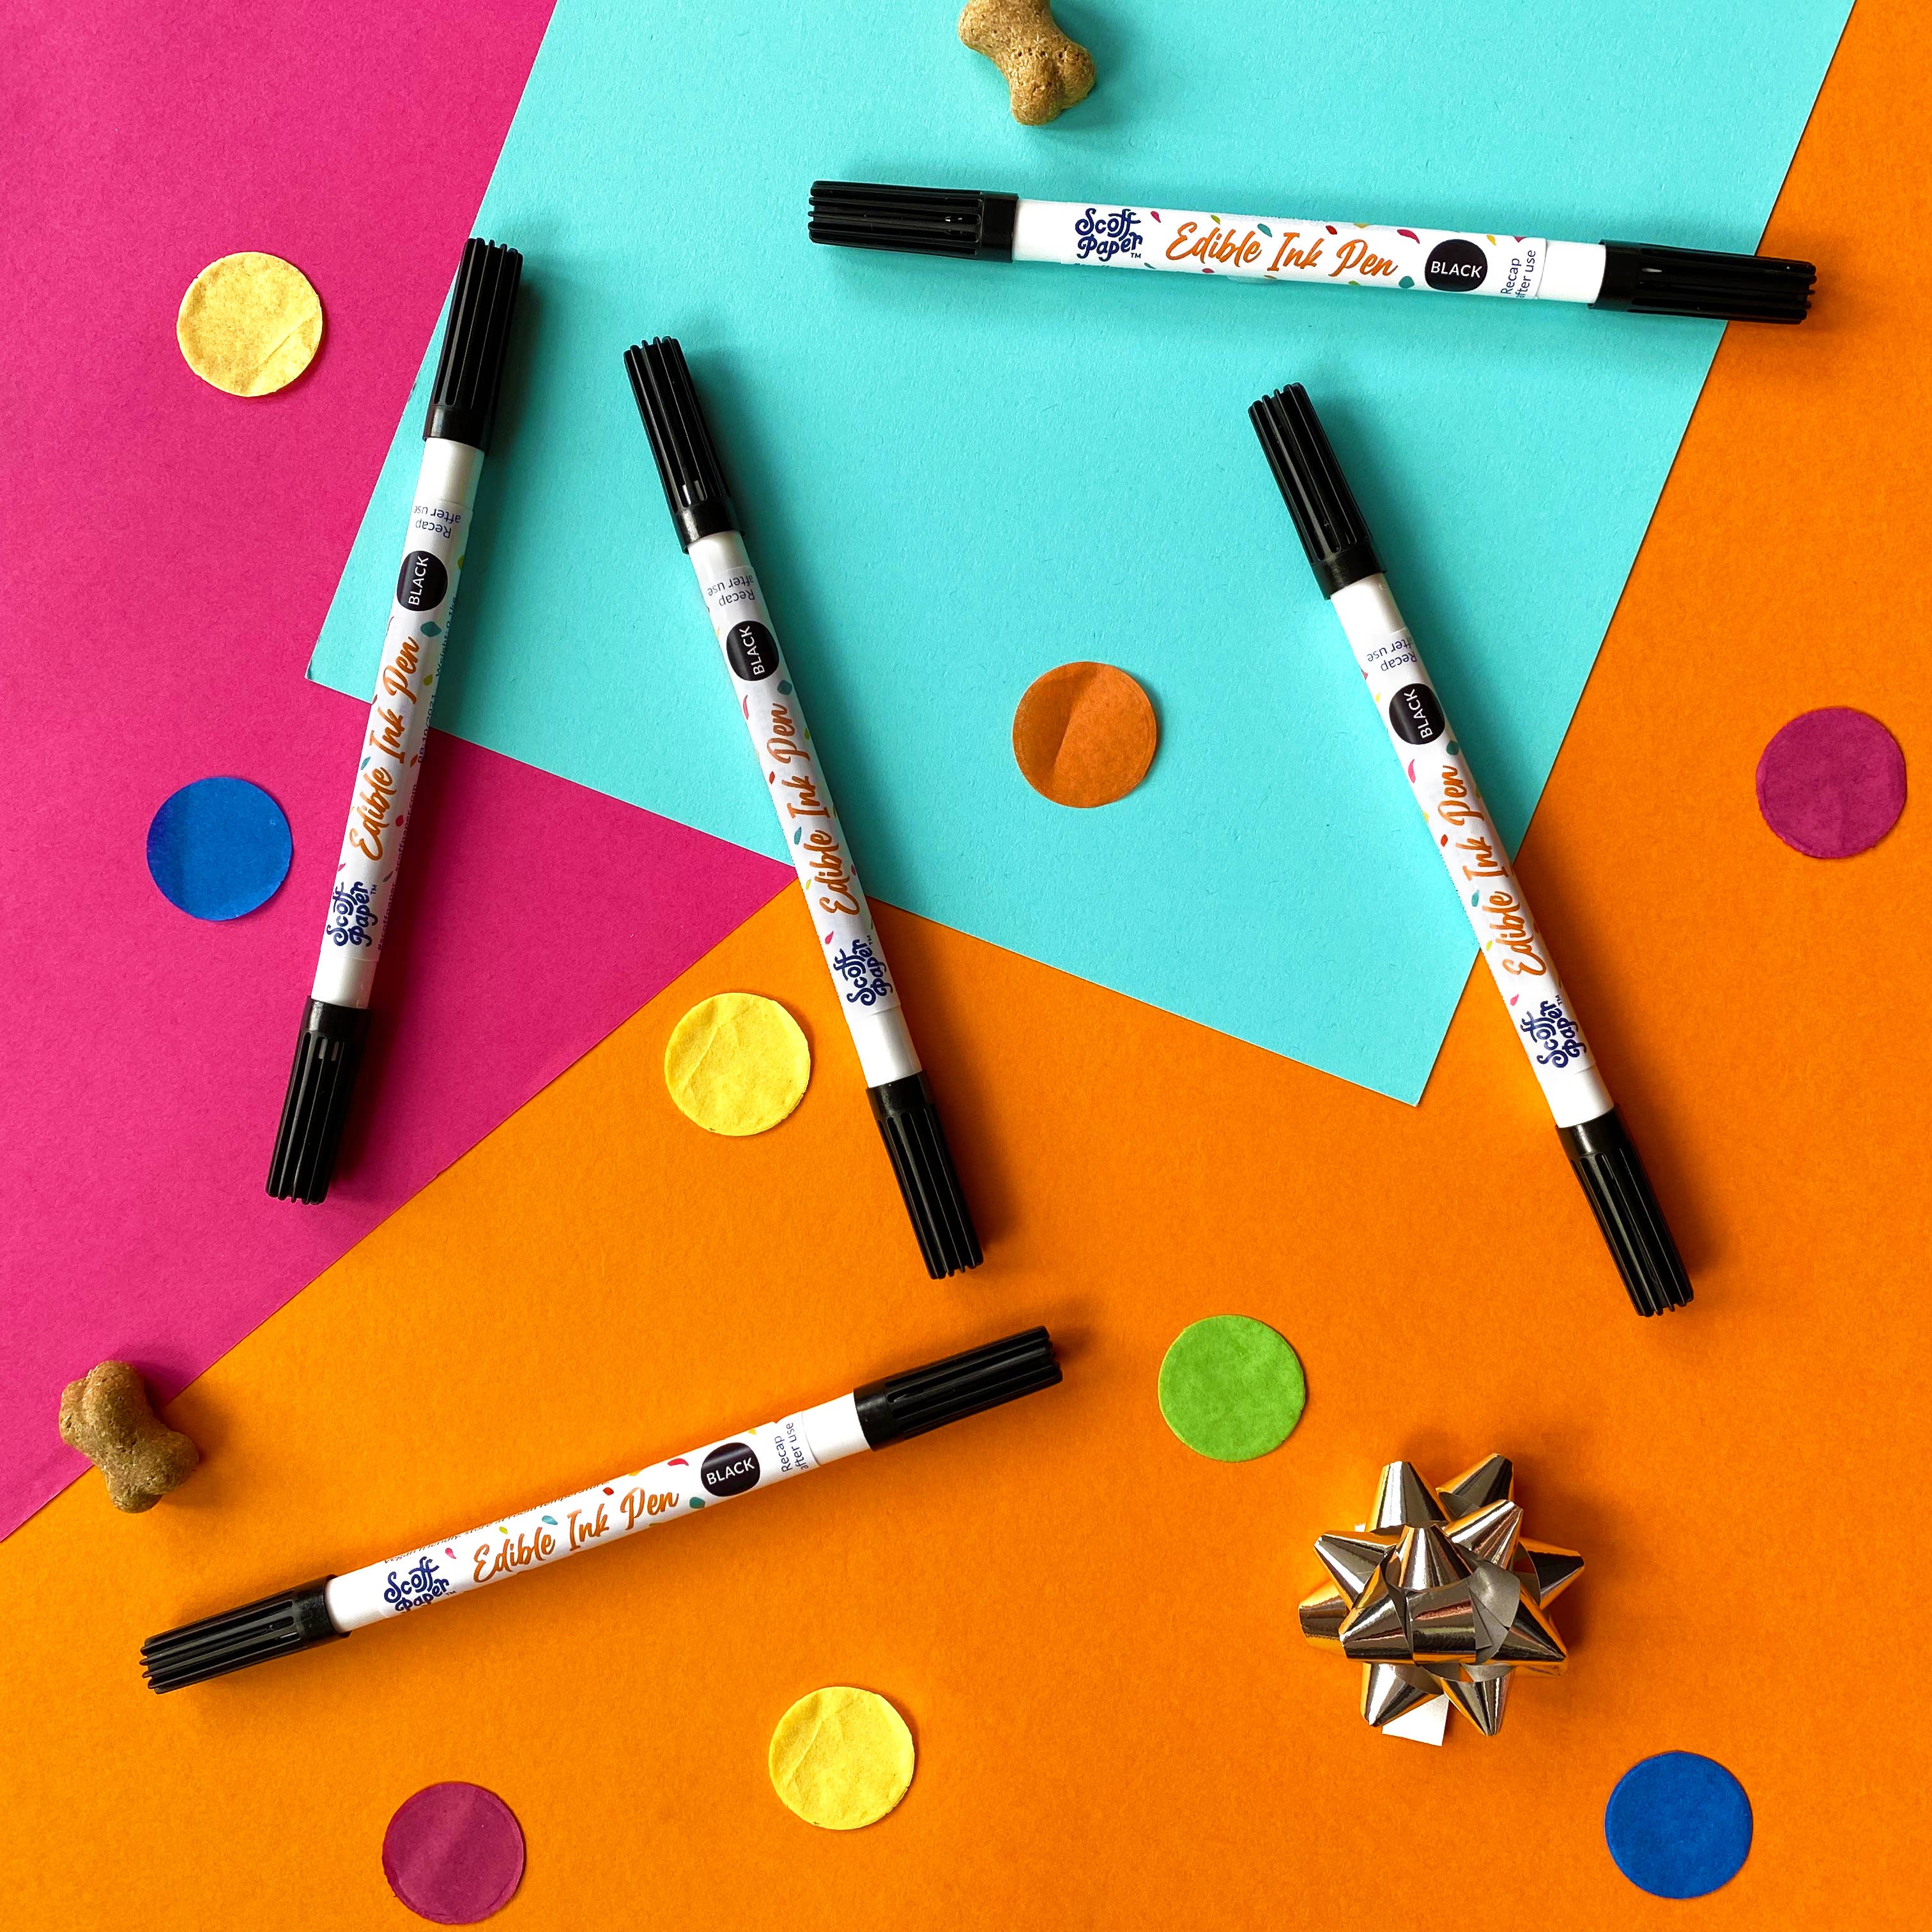 Scoff Paper - Scoff Paper - Edible Ink Pen For Dogs